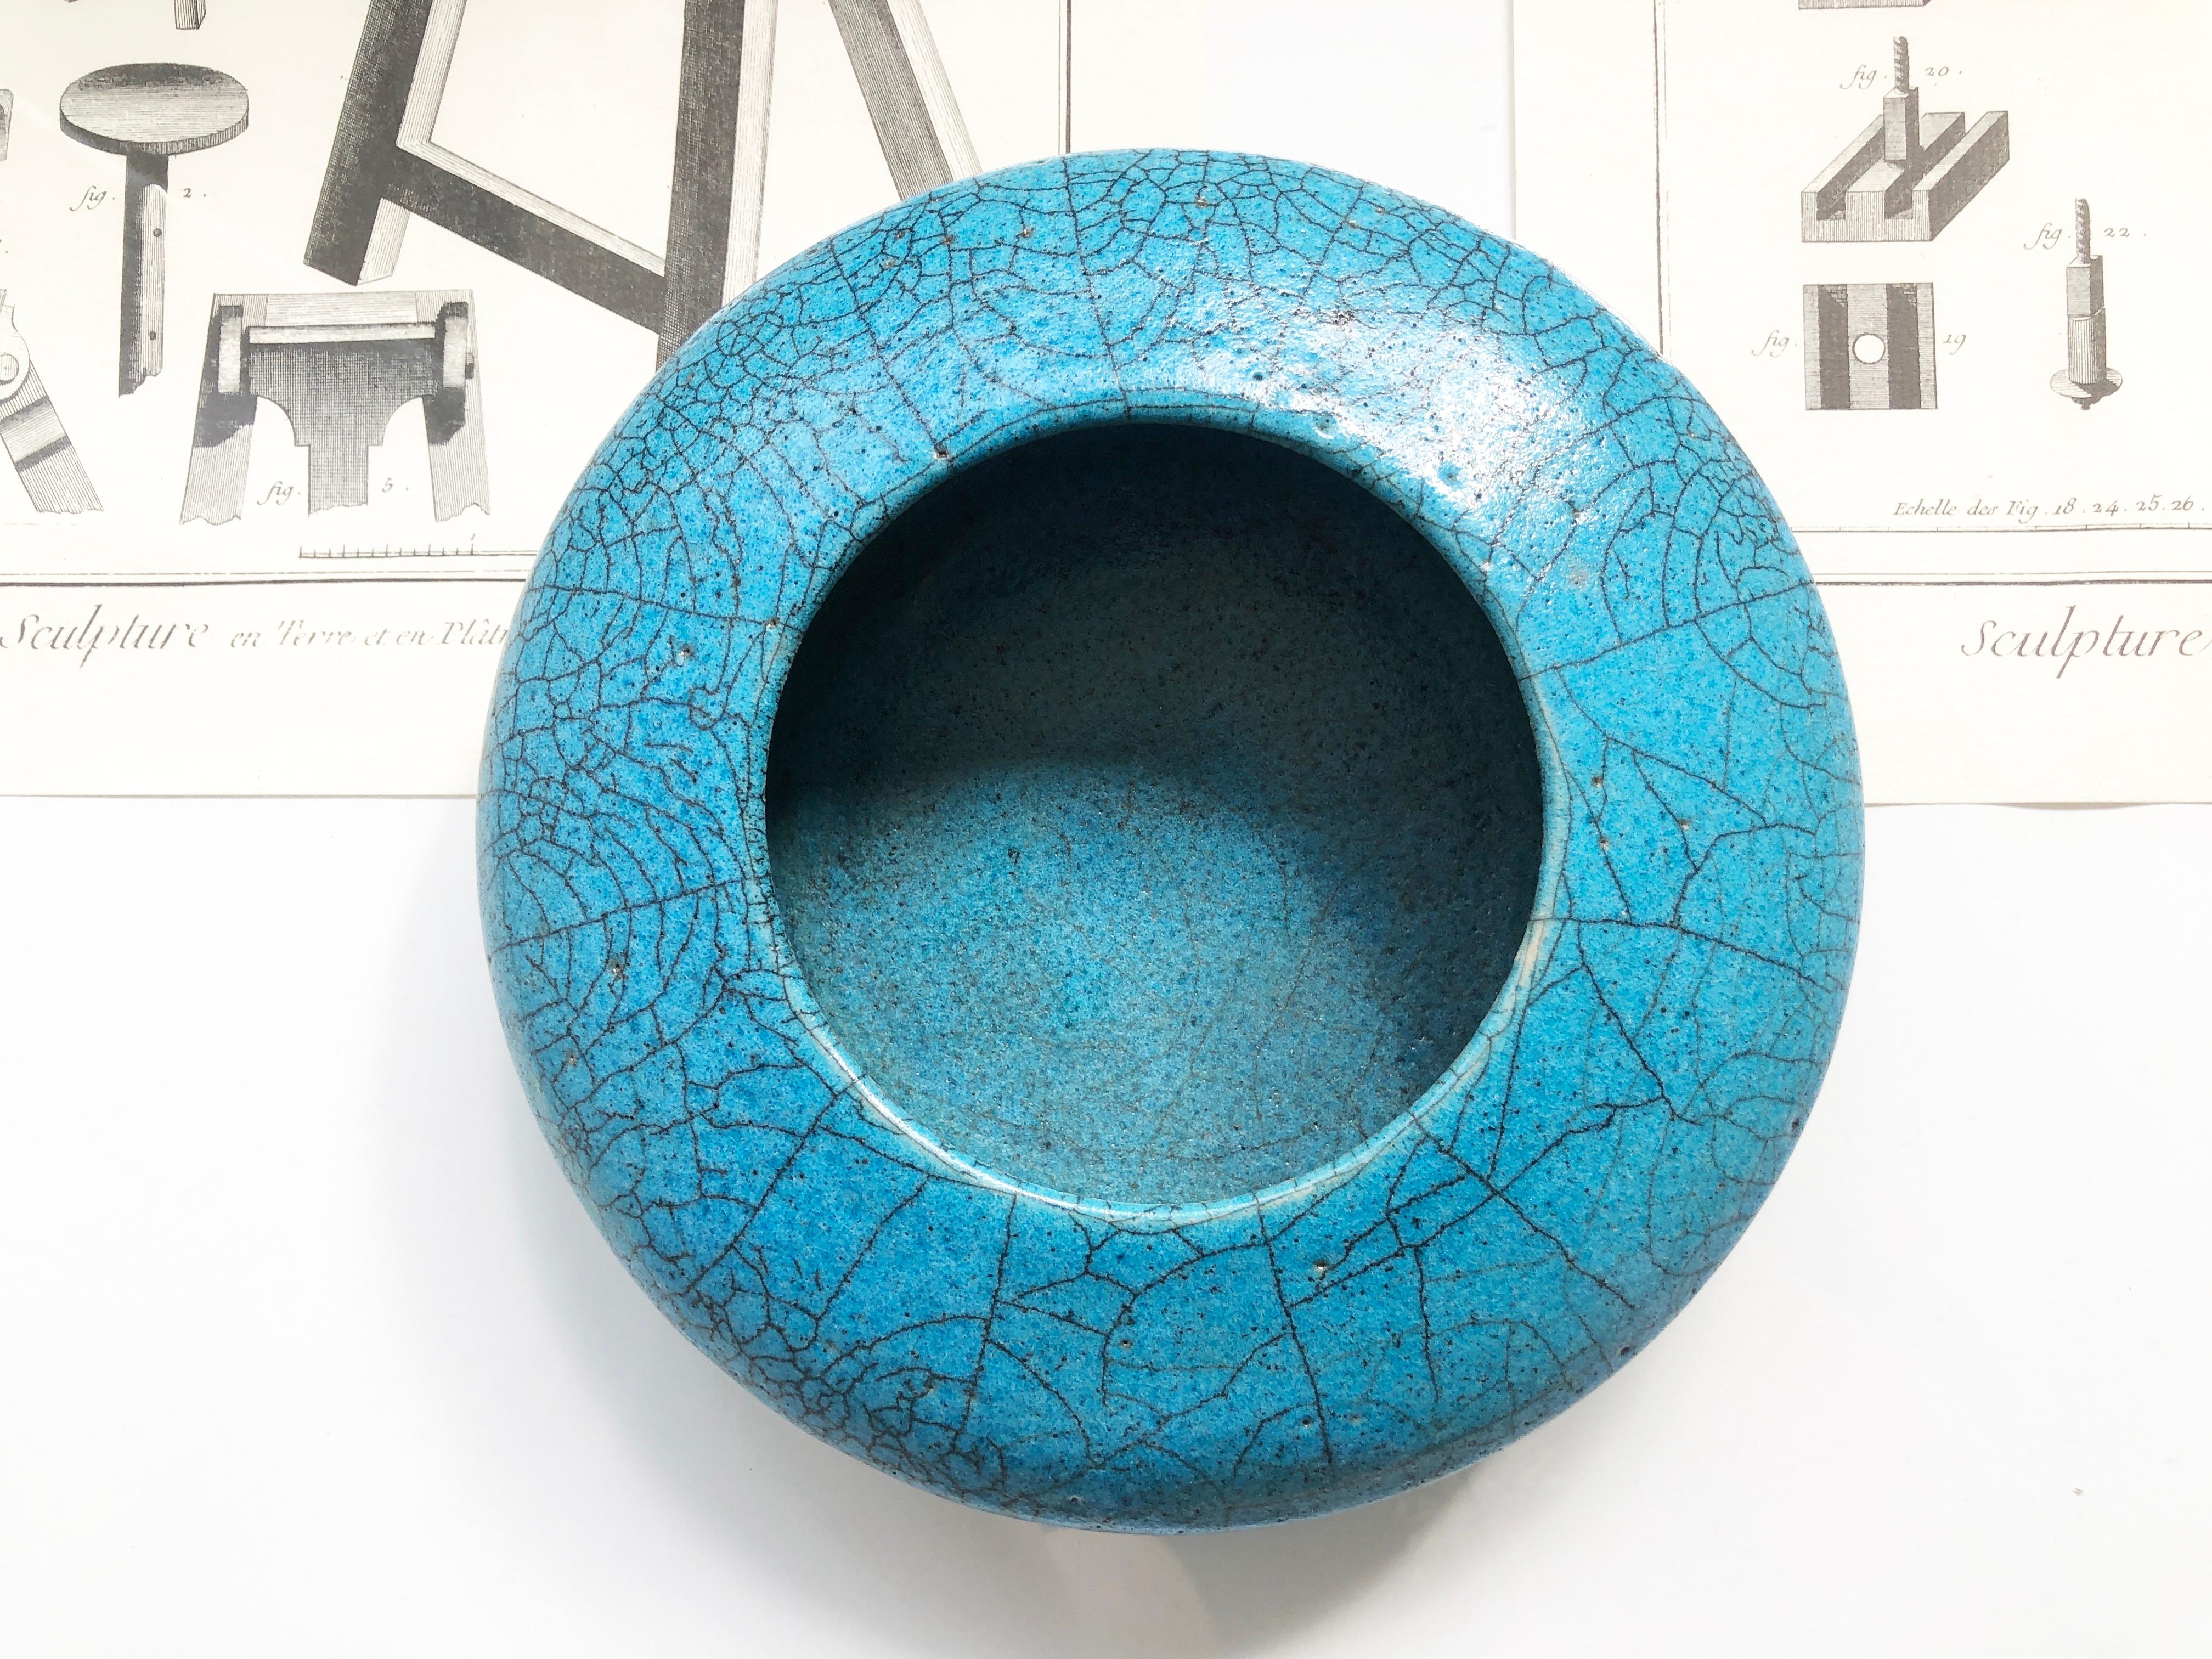 A truly unusual piece of art is this low disc shaped bowl or vase with a turquoise Raku glaze and fat lava hints towards the base.
The ceramic base shows the deep charcoal black of the base material.
Raku glaze has it's origin in Japan. The abstract